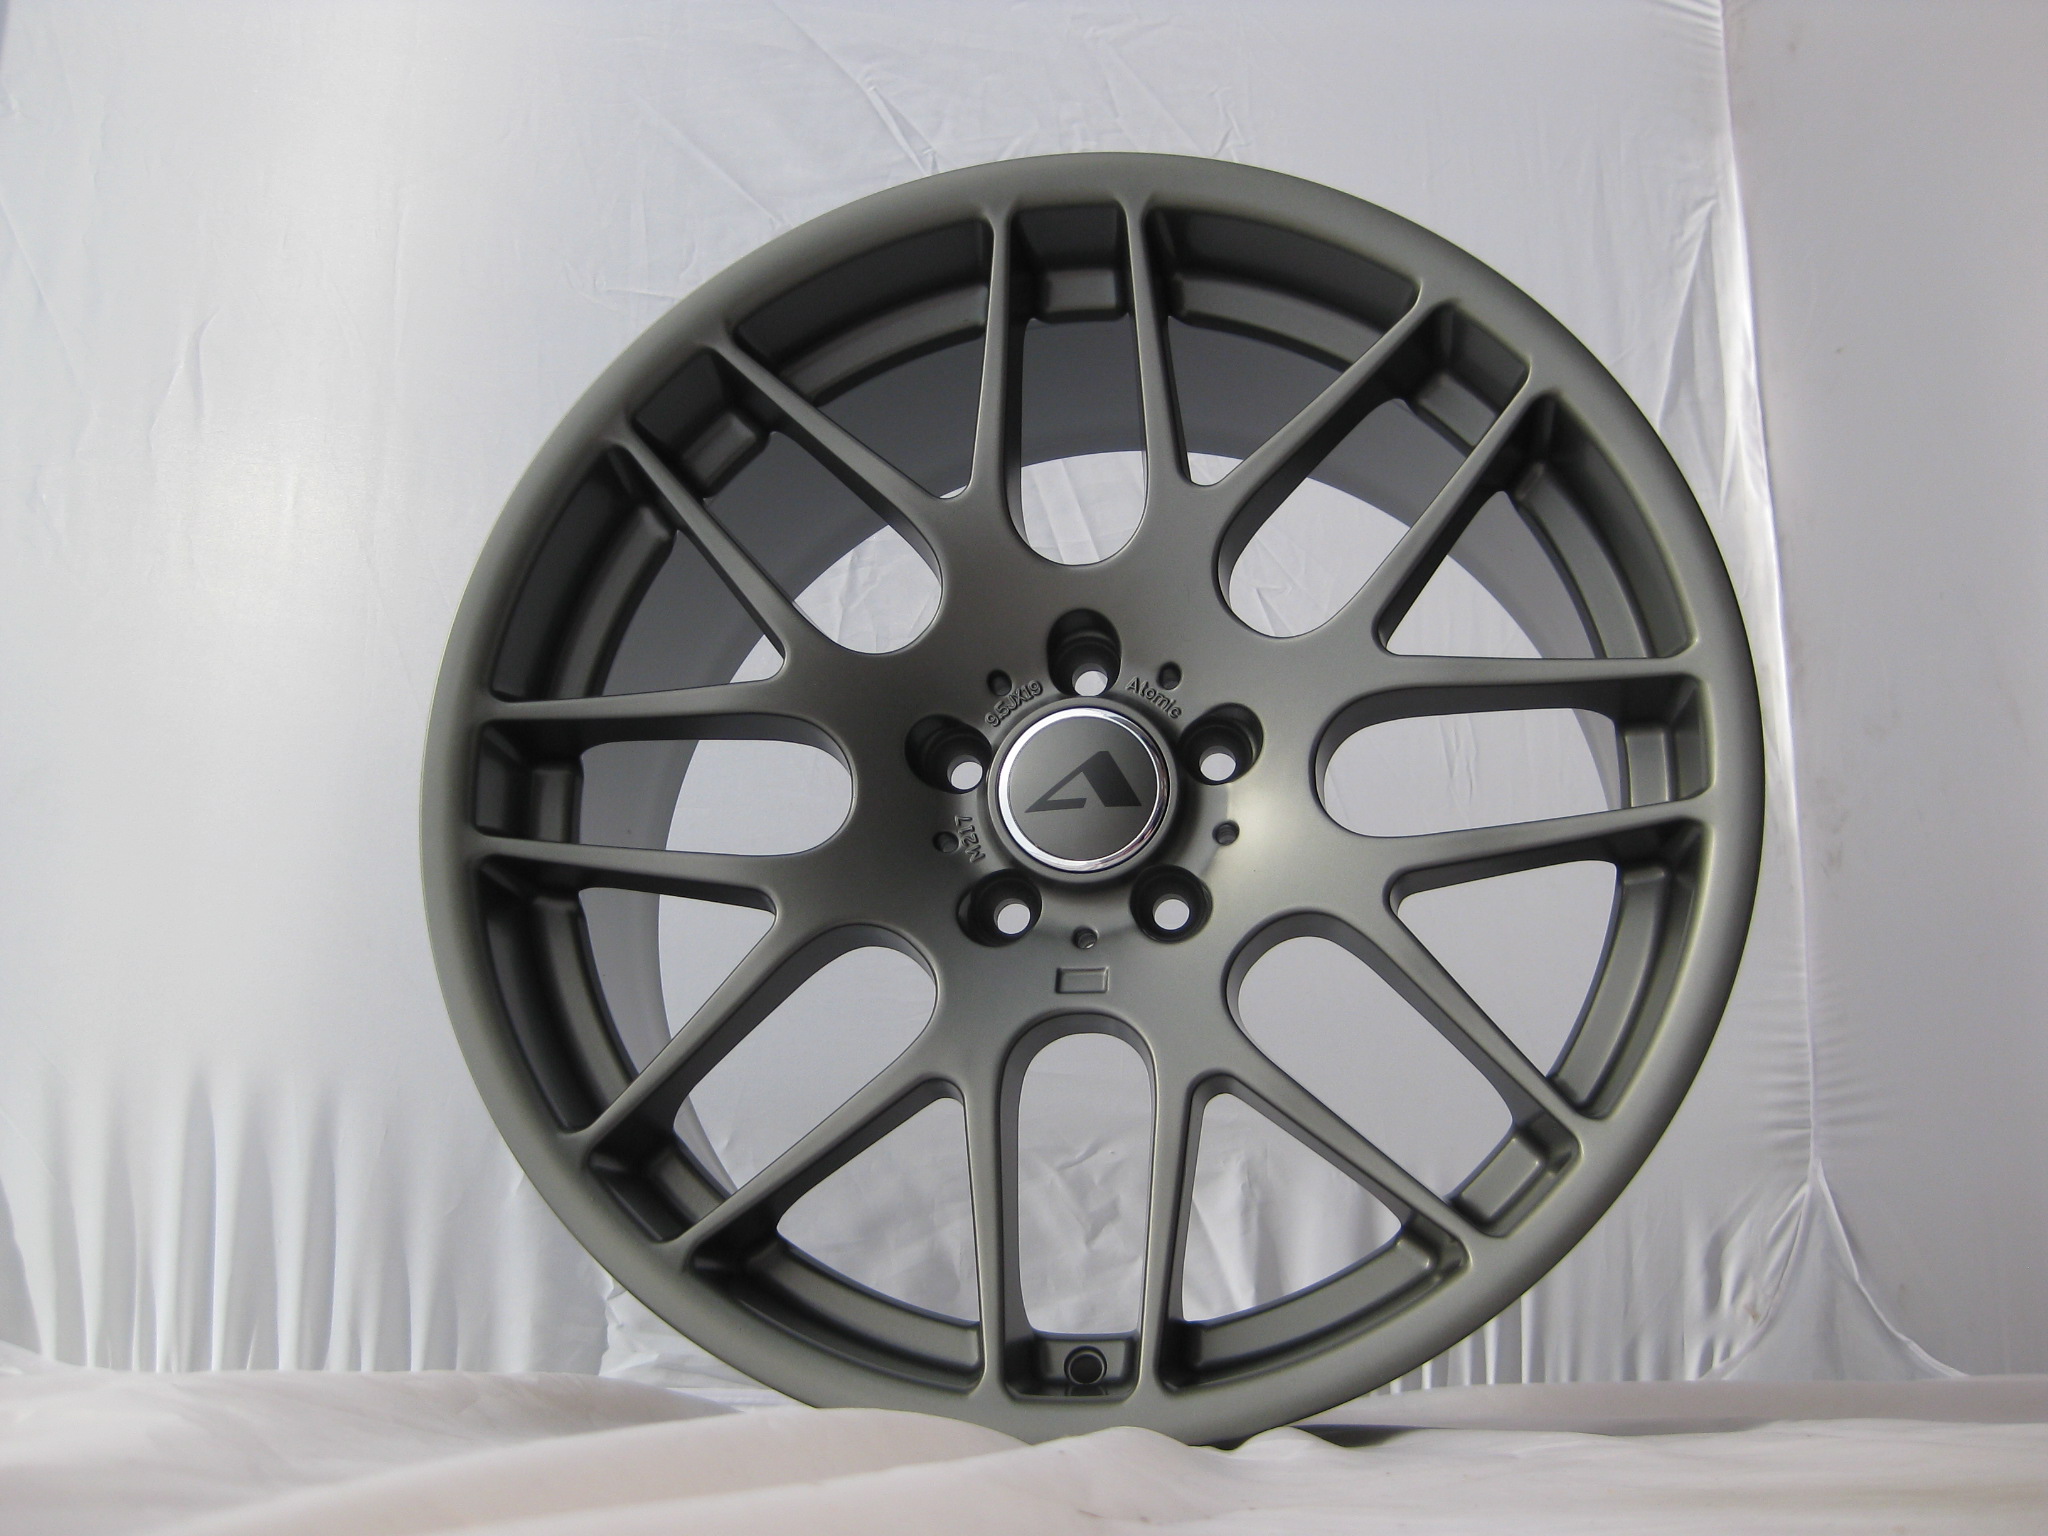 NEW 19  ATOMIC CS Y SPOKE ALLOY WHEELS WITH DEEP CONCAVE IN SATIN GUNMETAL 9 5 et38 All Round